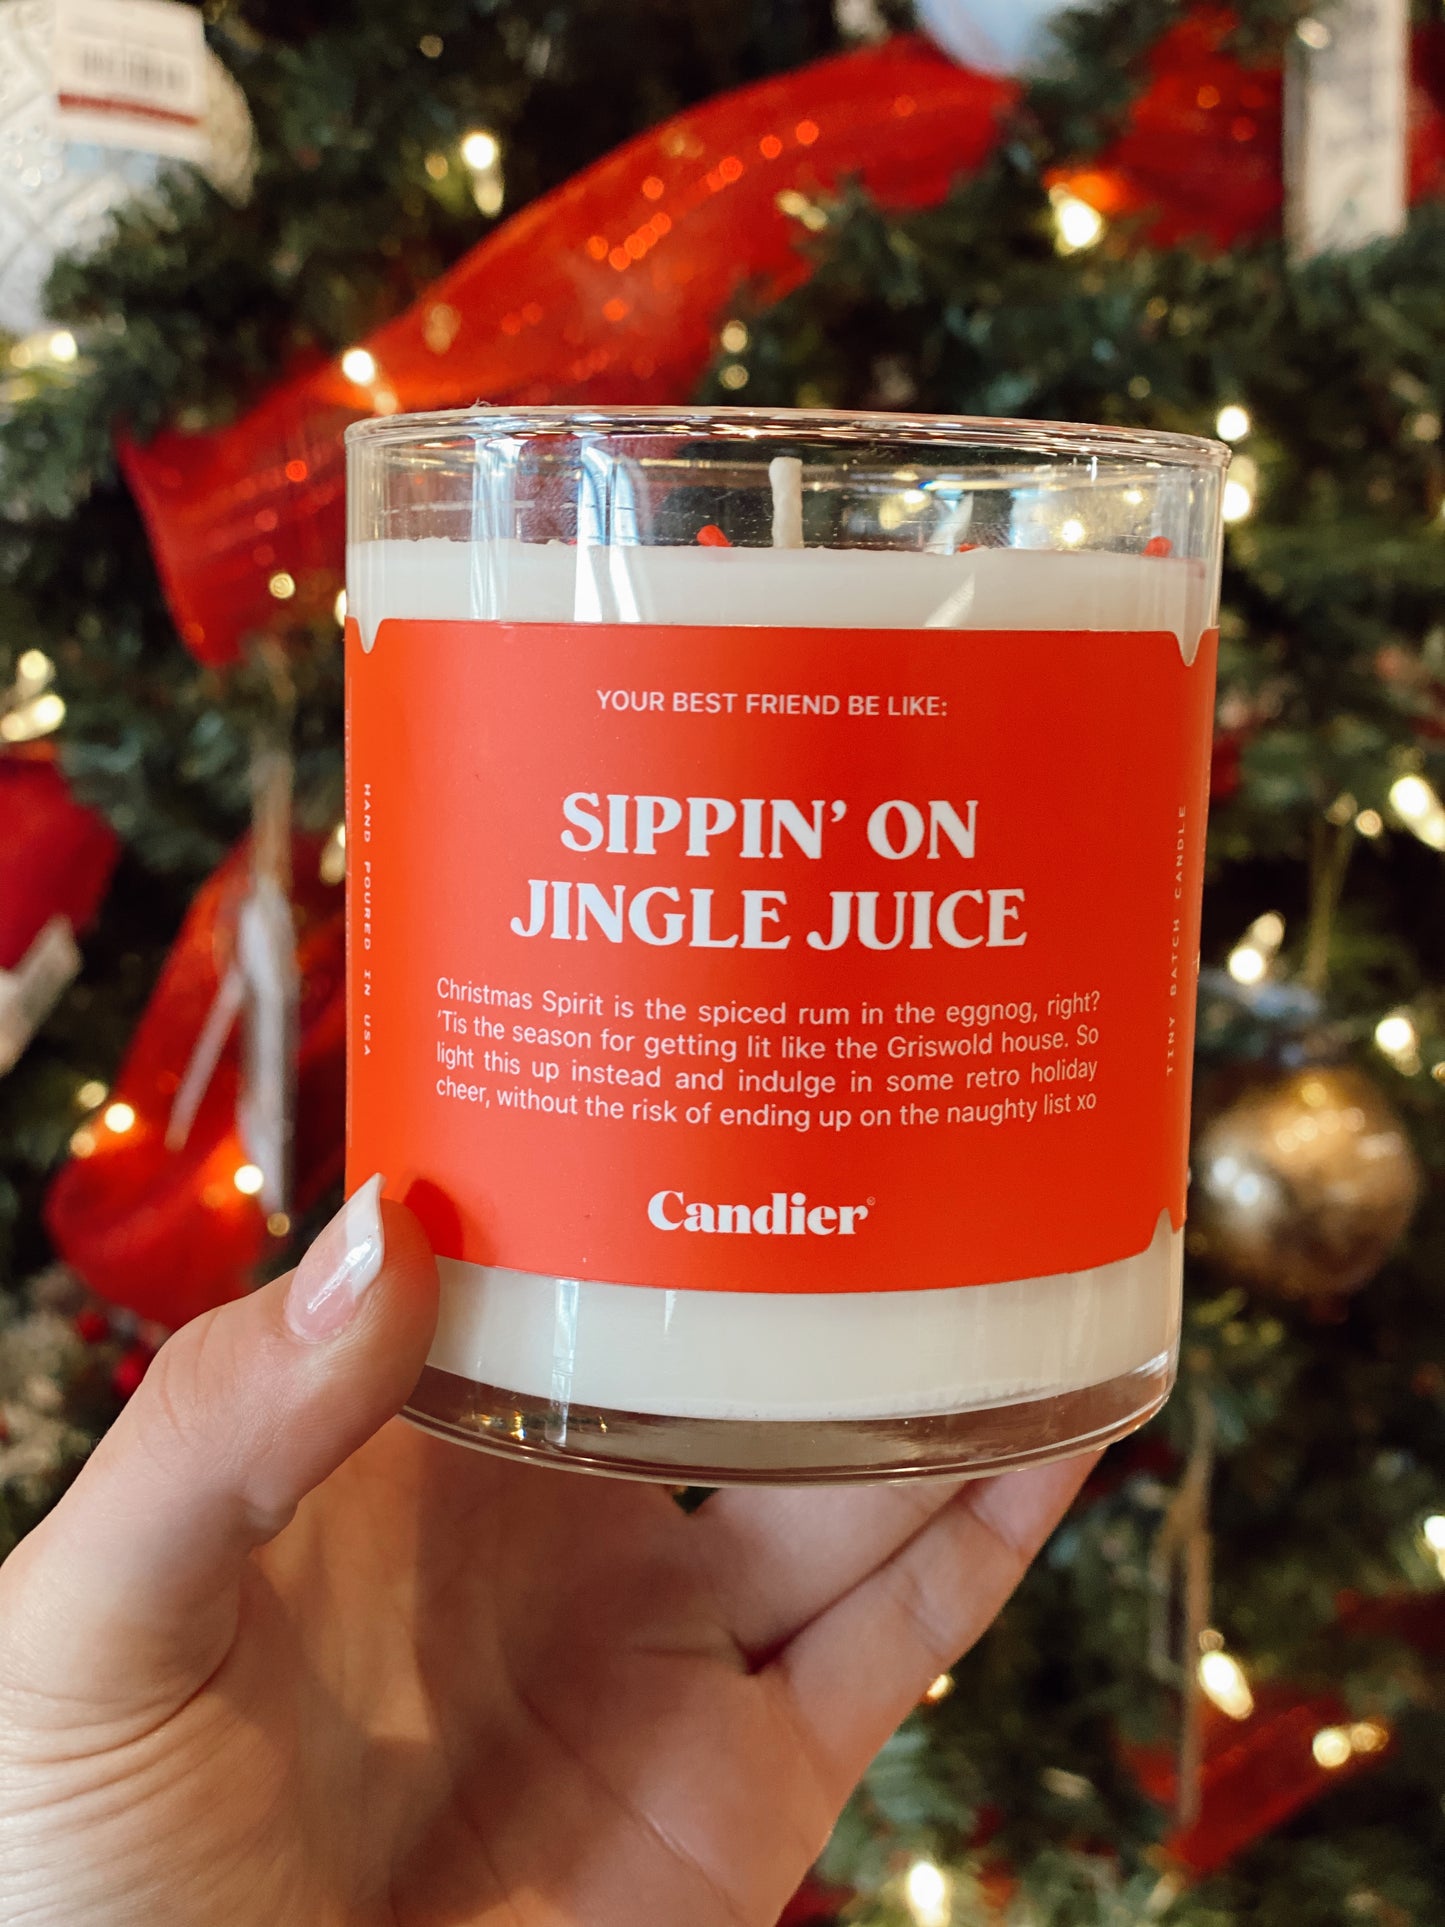 The Candier Candles